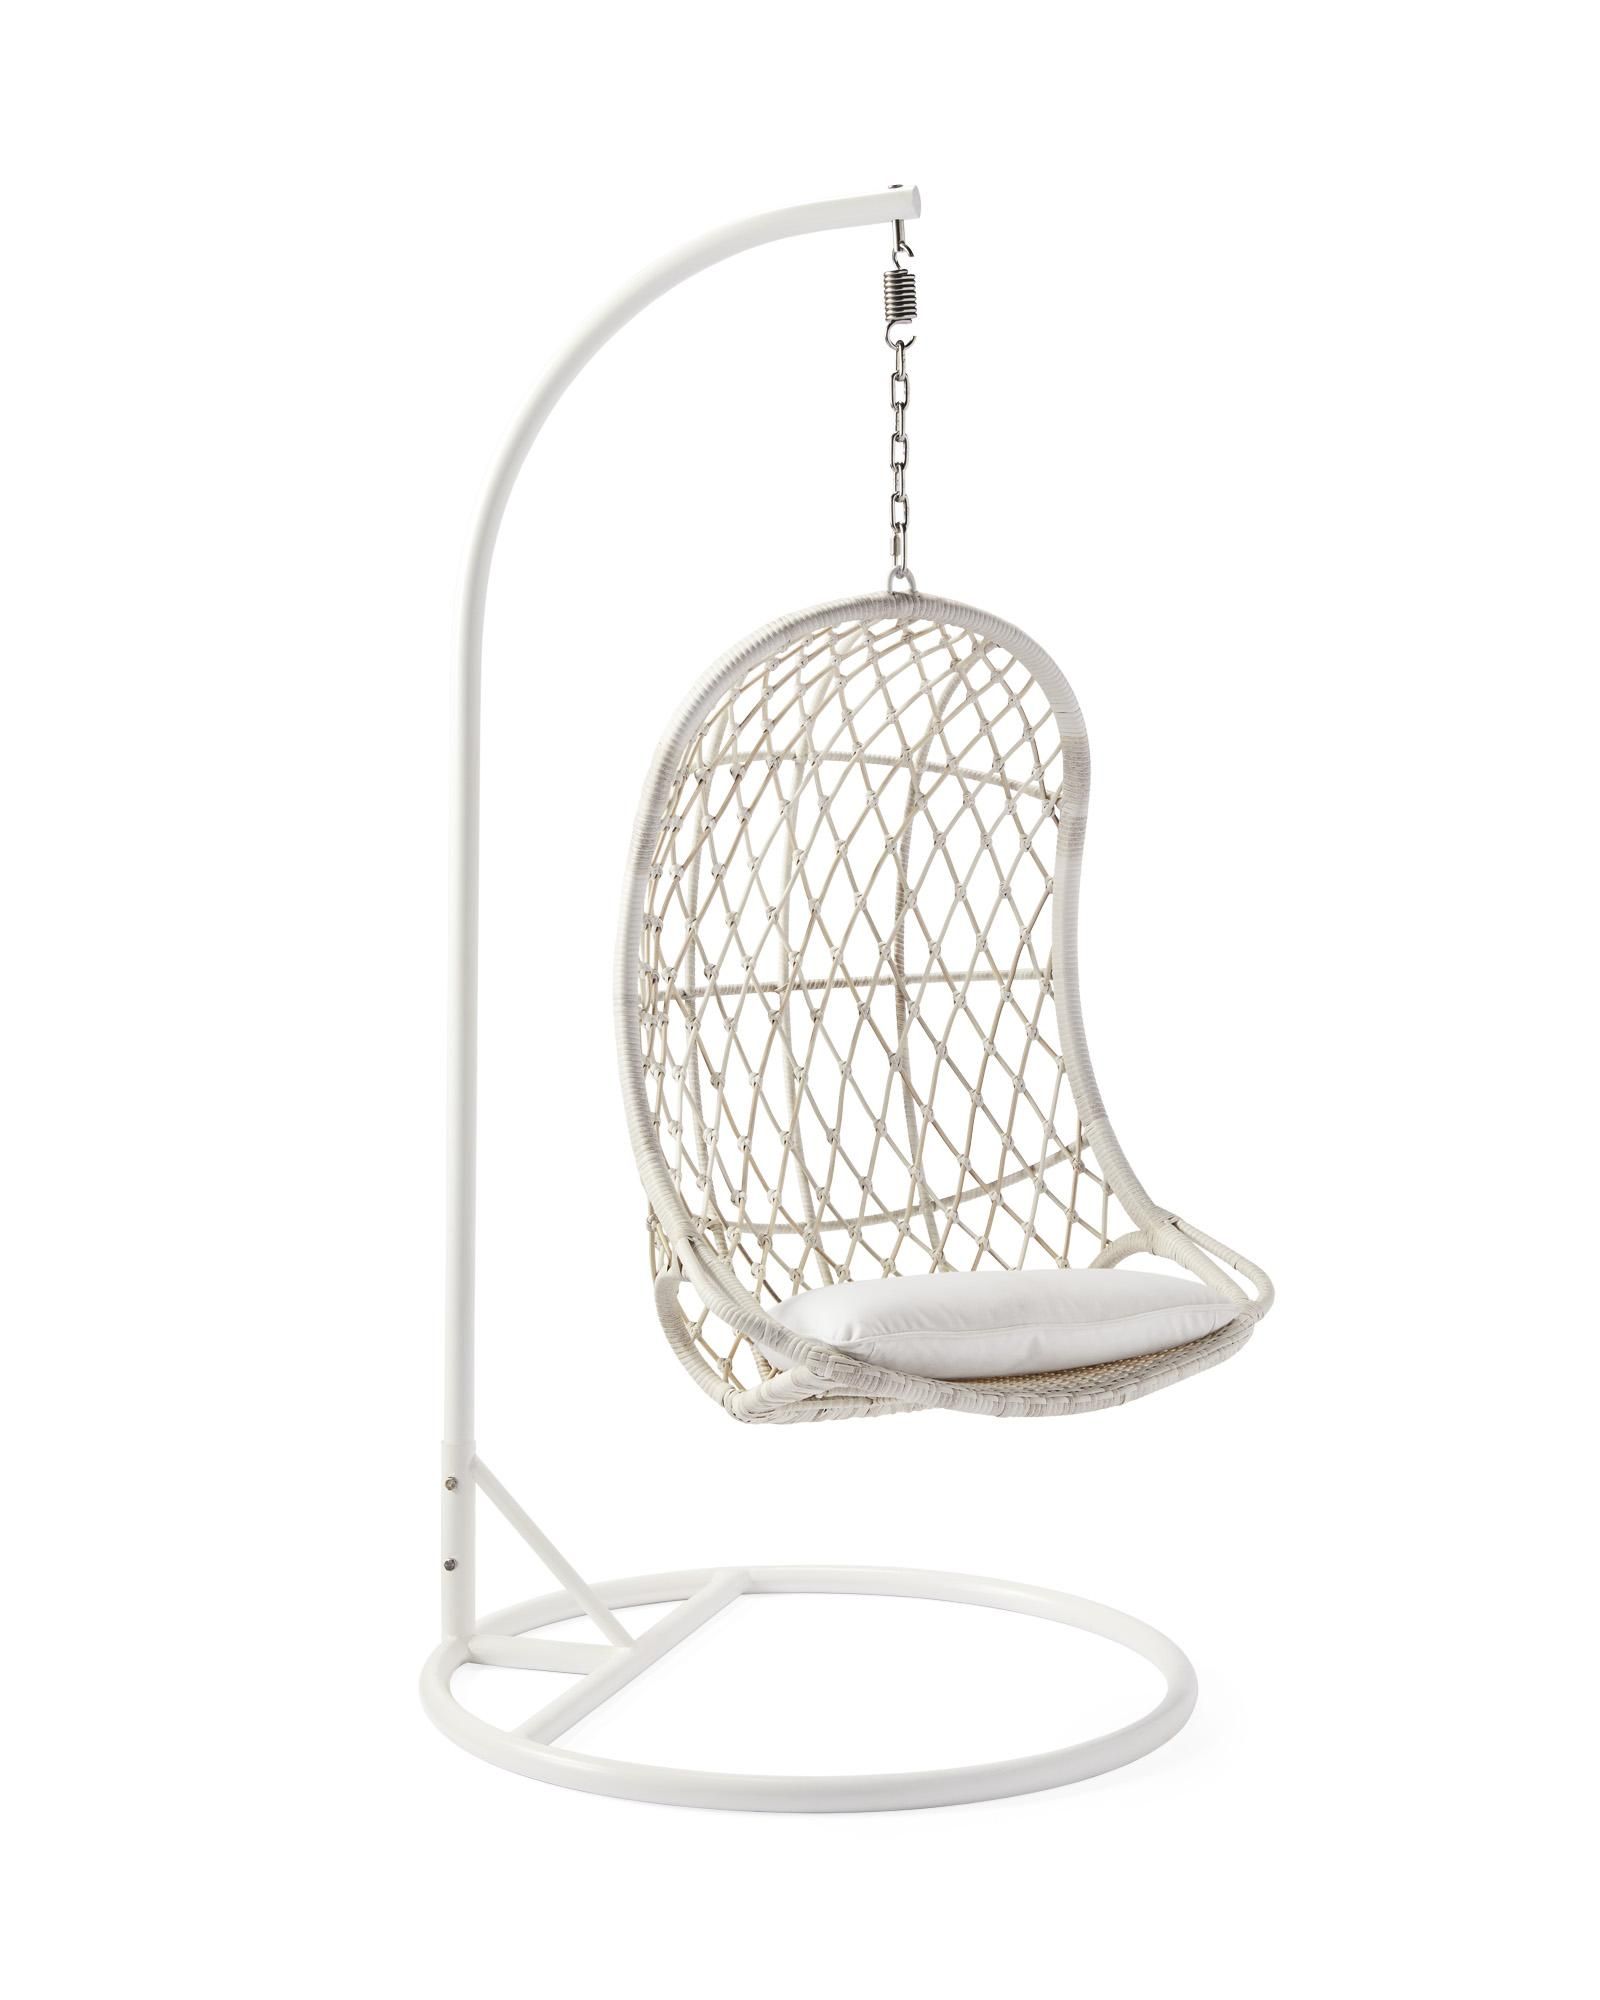 Capistrano Hanging Chair & Stand - Driftwood | Serena and Lily